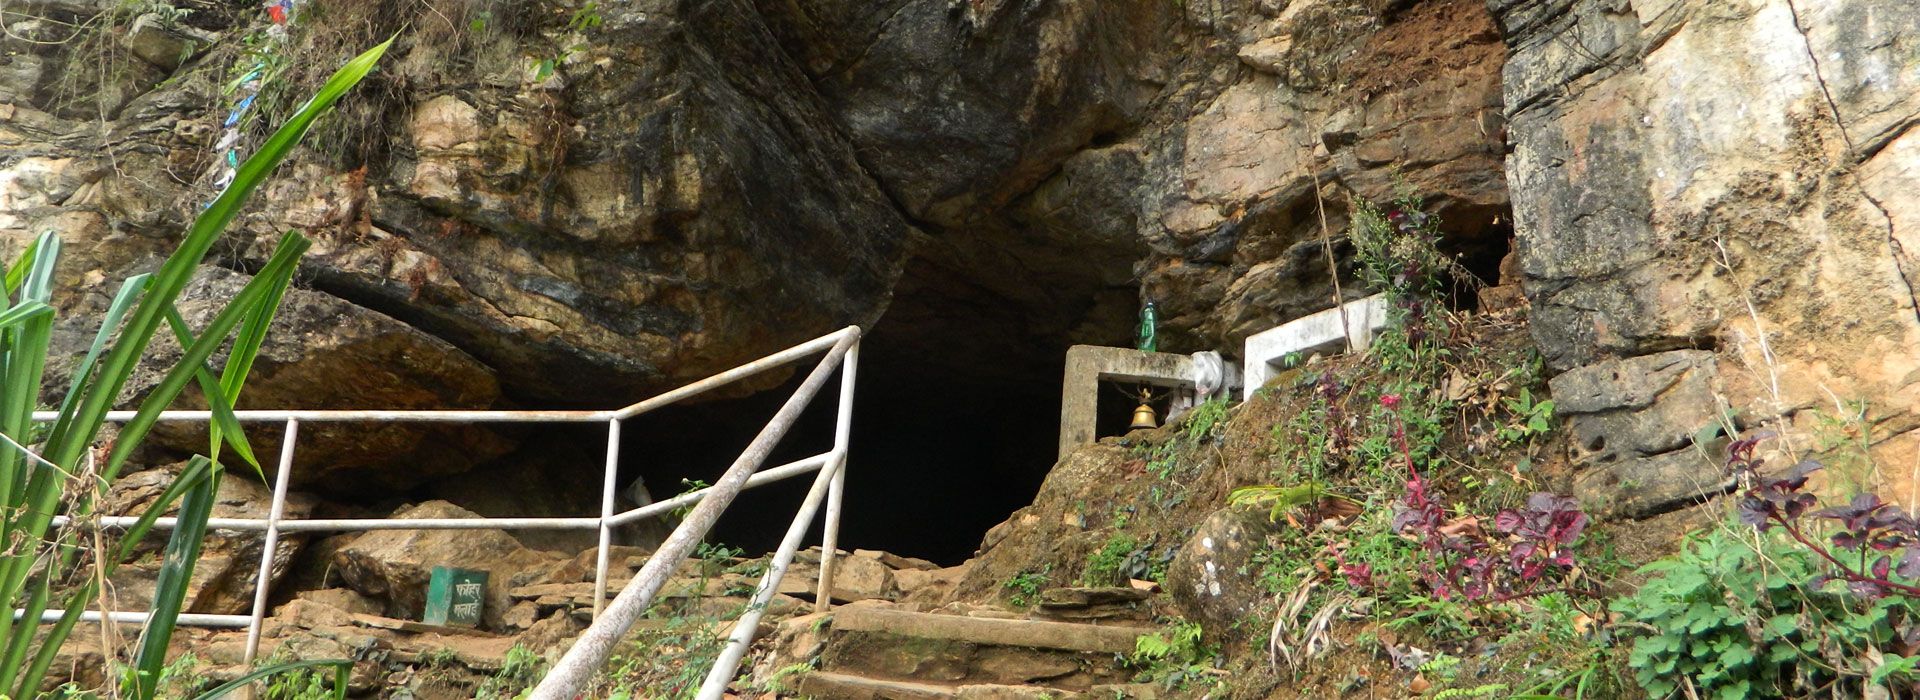 Siddha cave, largest cave in Nepal